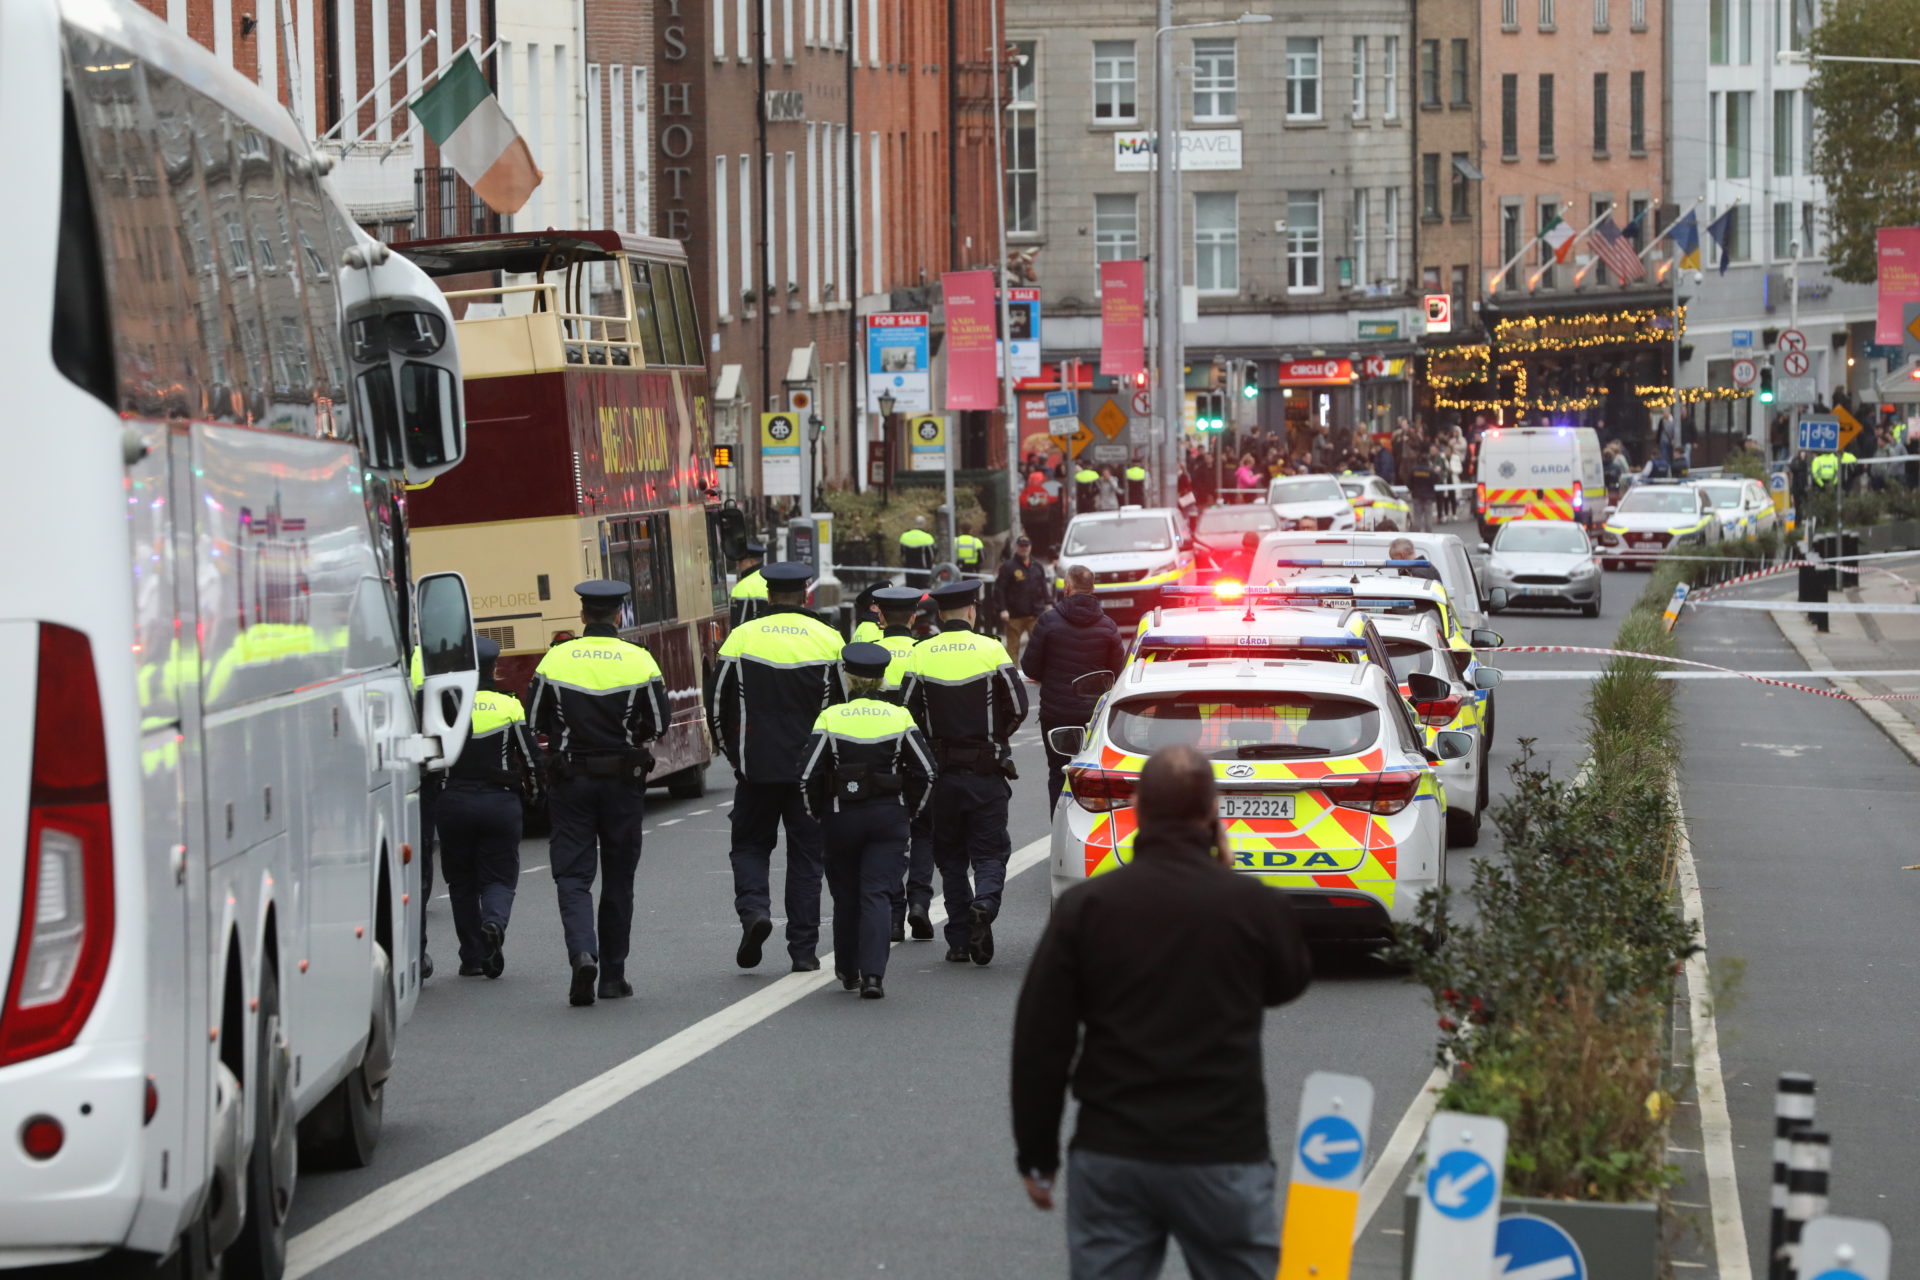 Gardaí at the scene where a teacher and three children were injured in a stabbing attack